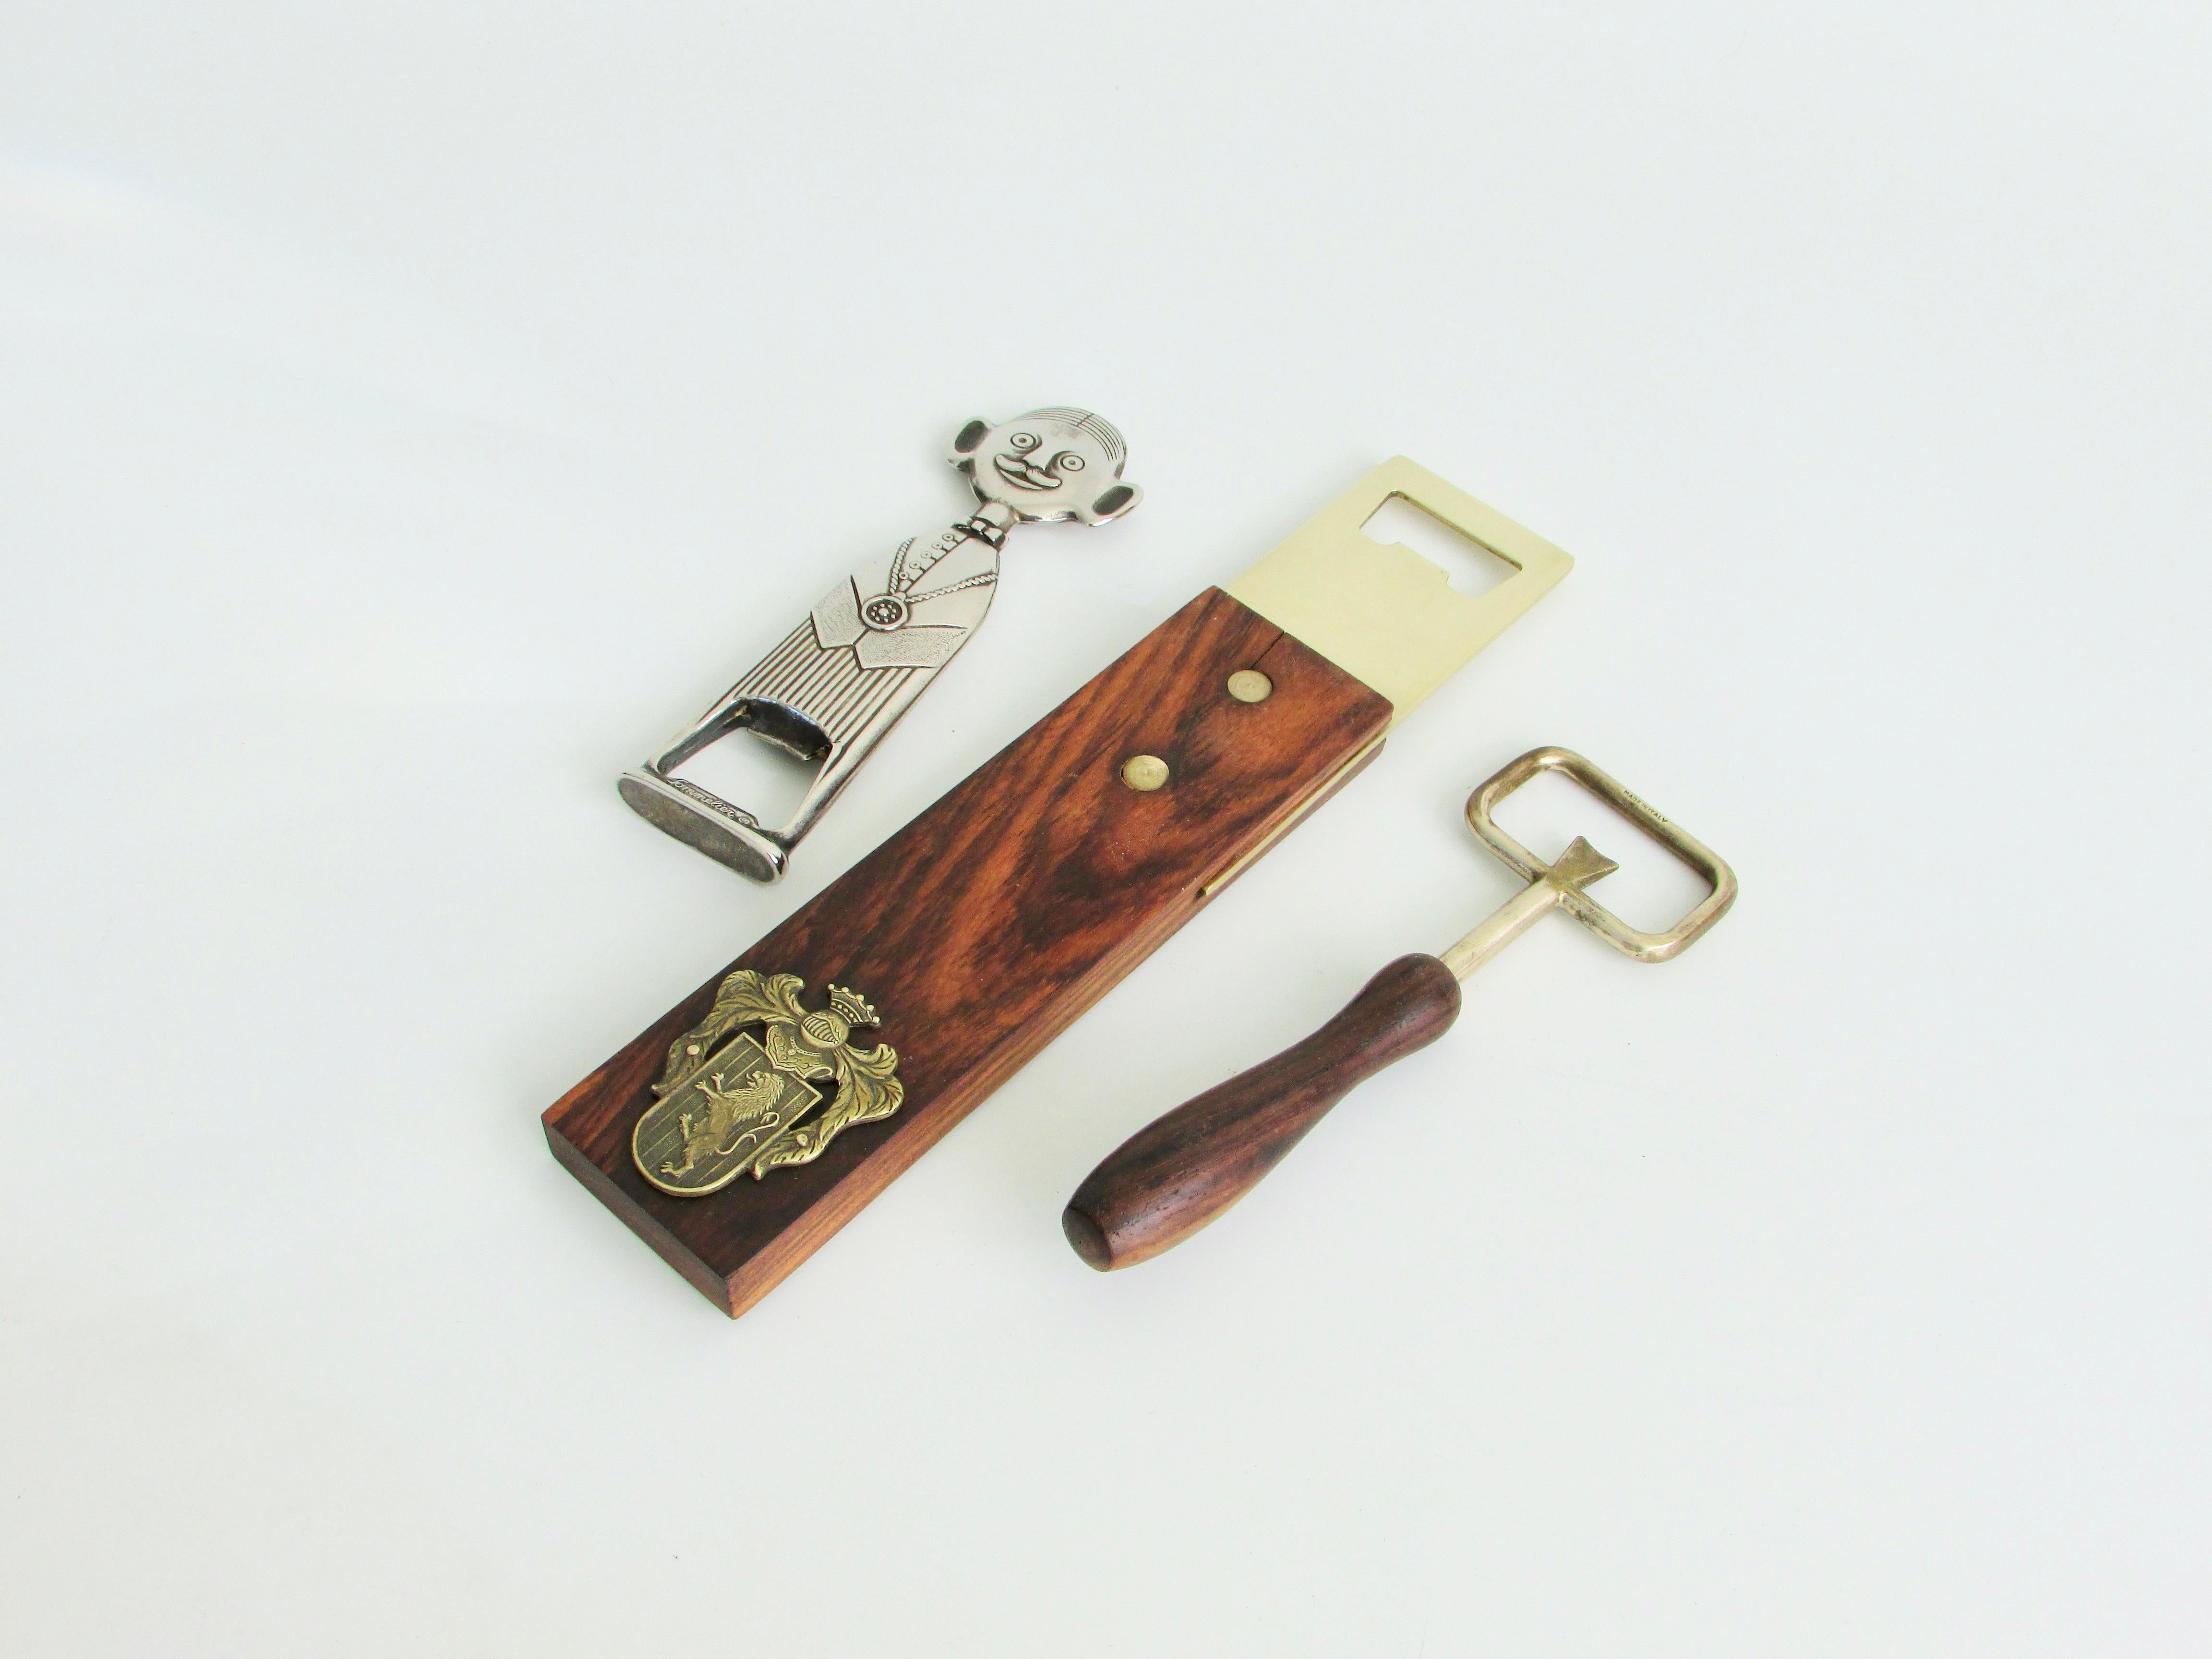 Three separate bottle openers in clever modernist designs . Each marked and made in Italy .Round handle piece measures 7x2.25 . Chrome figural opener measures 6.25 x 1.75 also signed Sommelier . Large rectangular rosewood with brass head measures